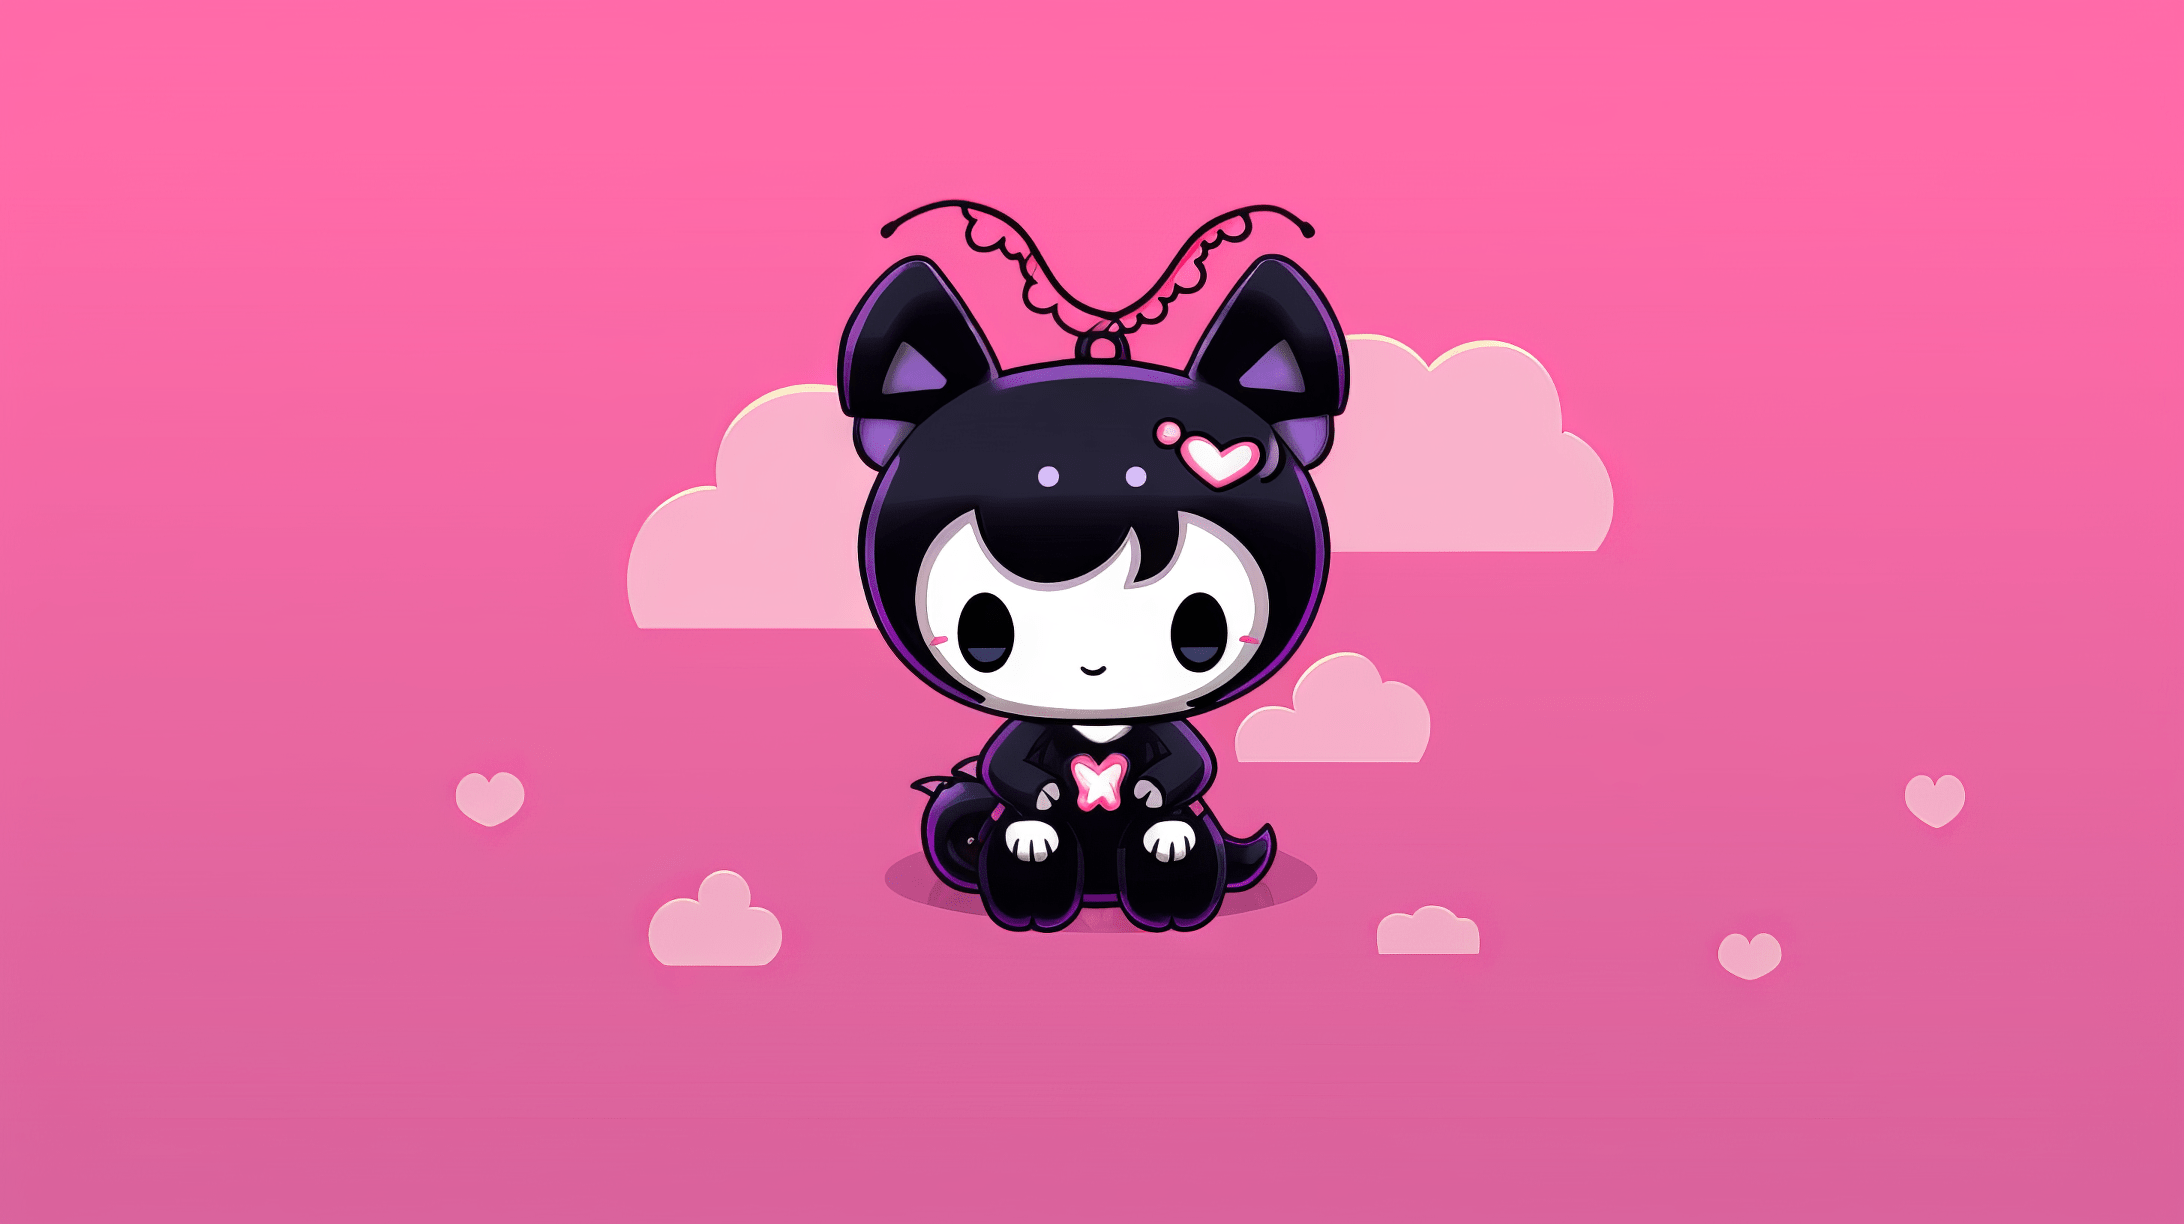 A black cat with horns and a tail sitting on a pink background - My Melody